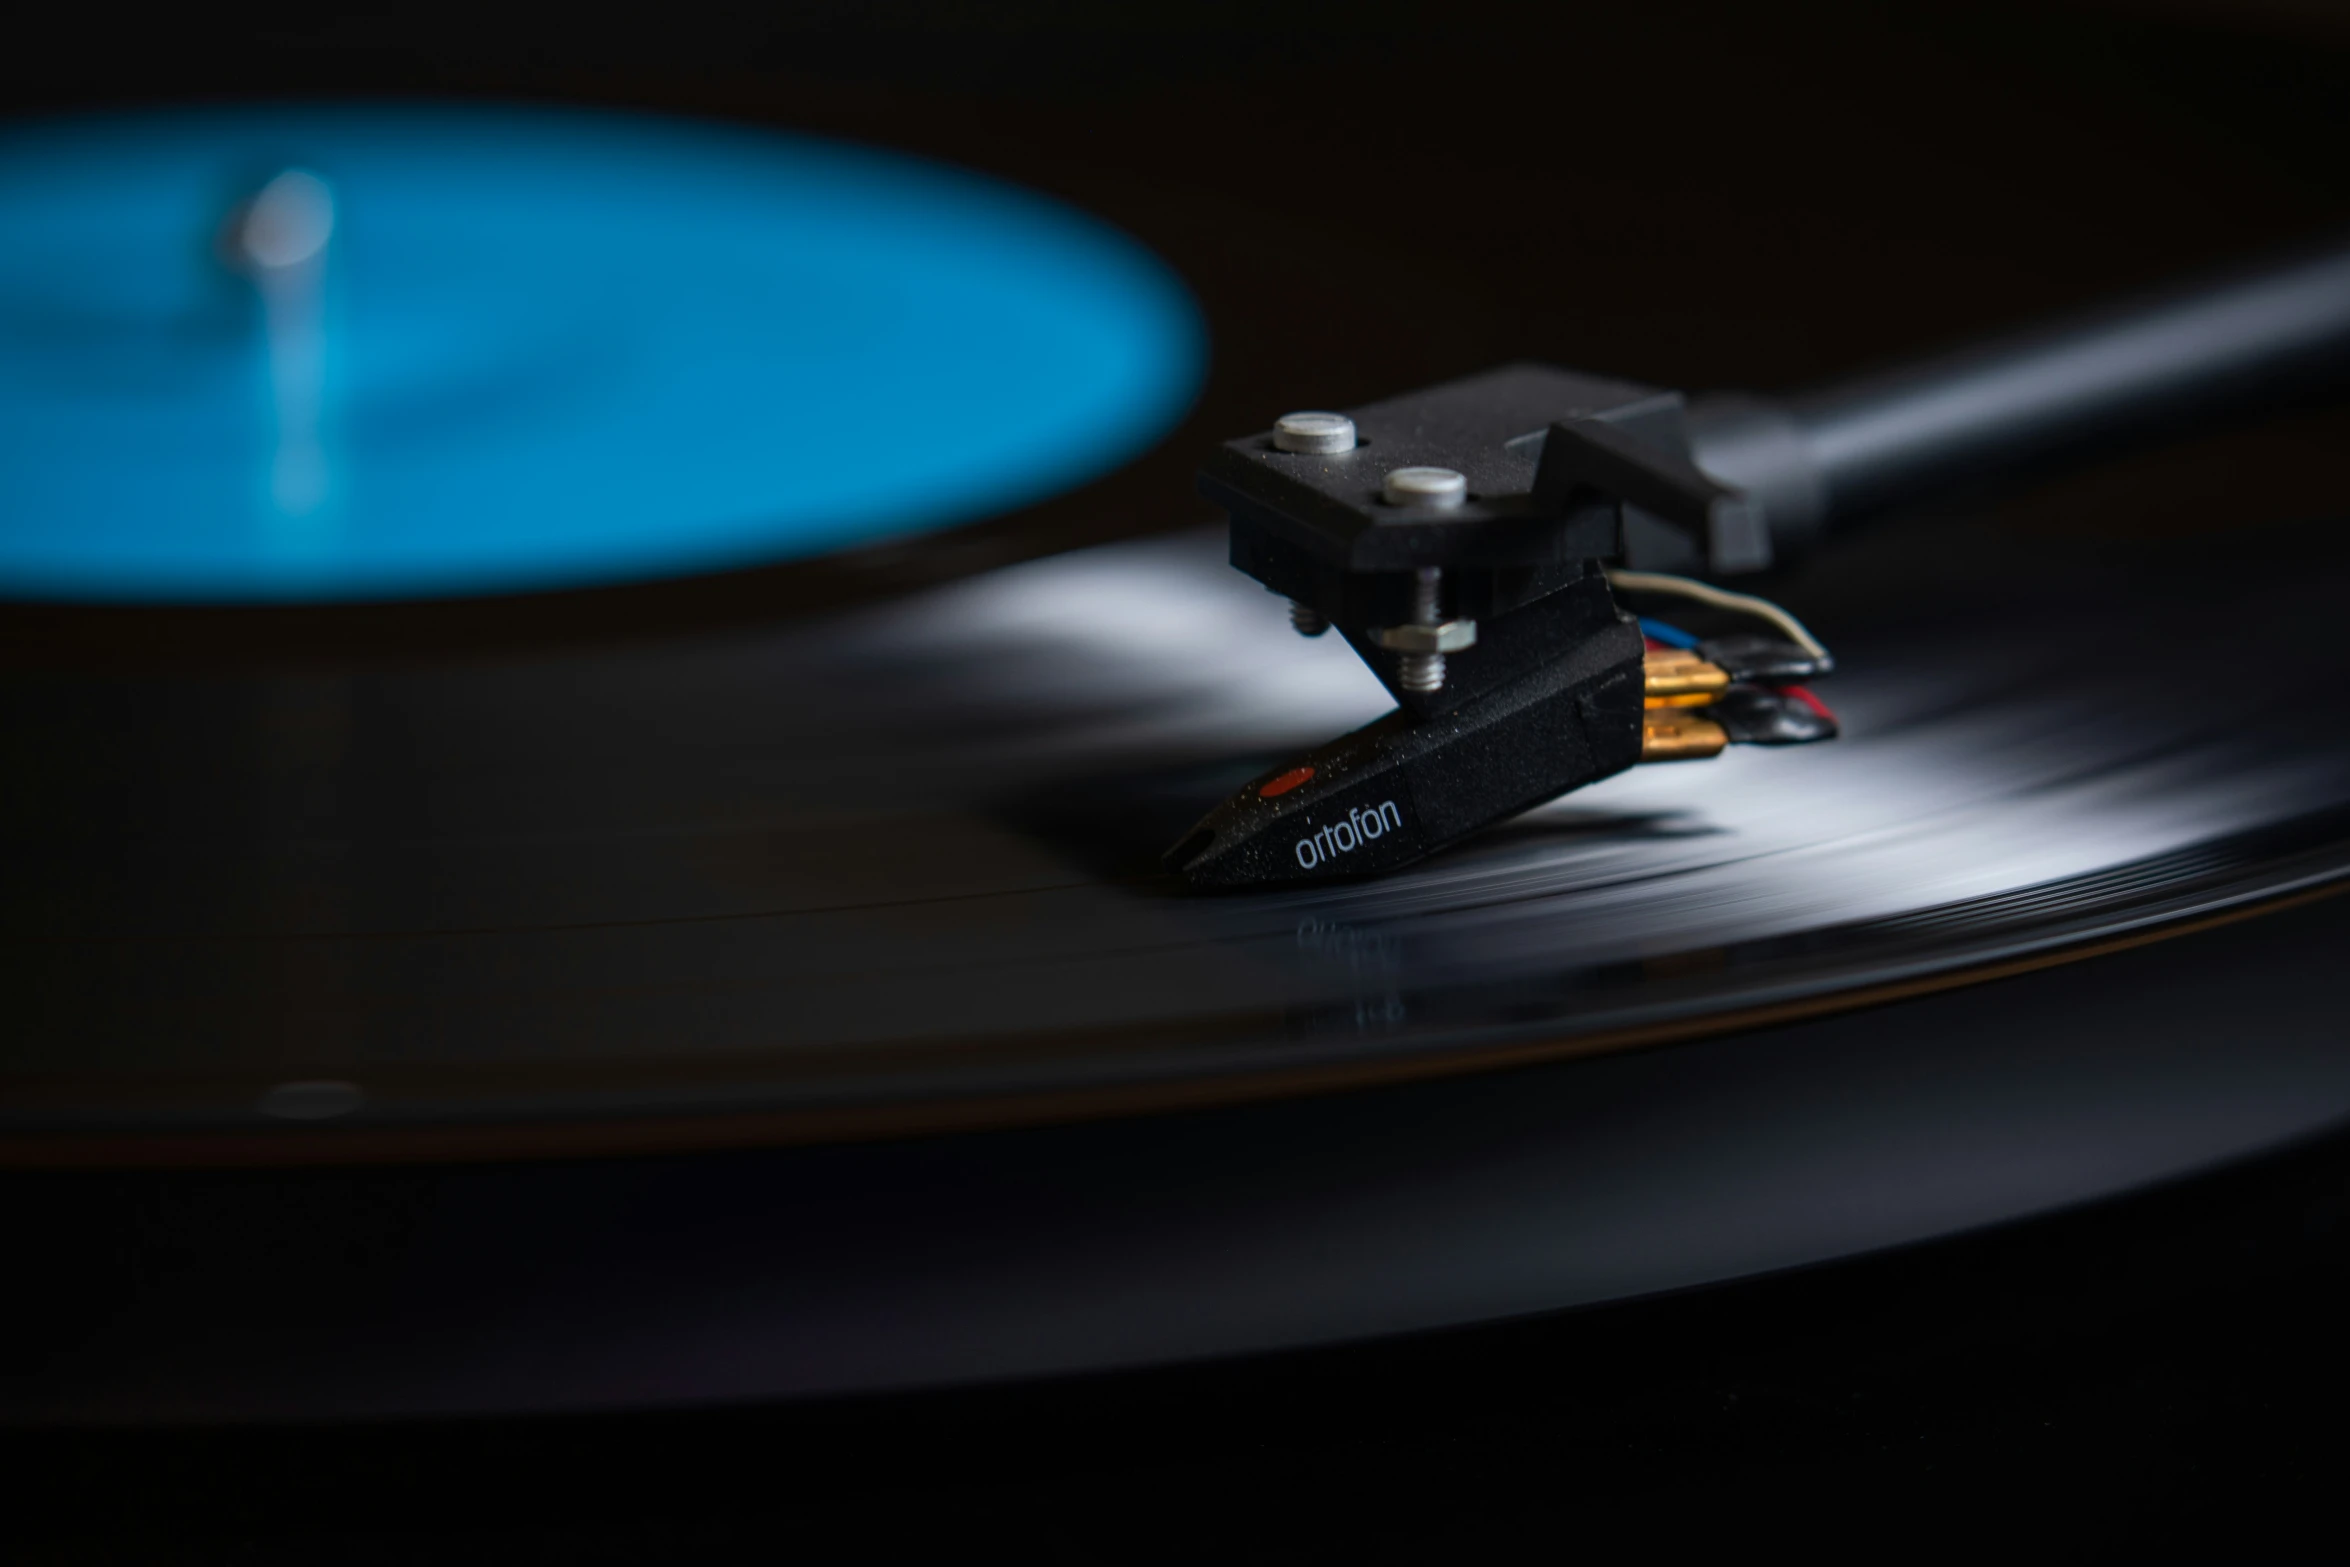 the record player is spinning it on its turntable